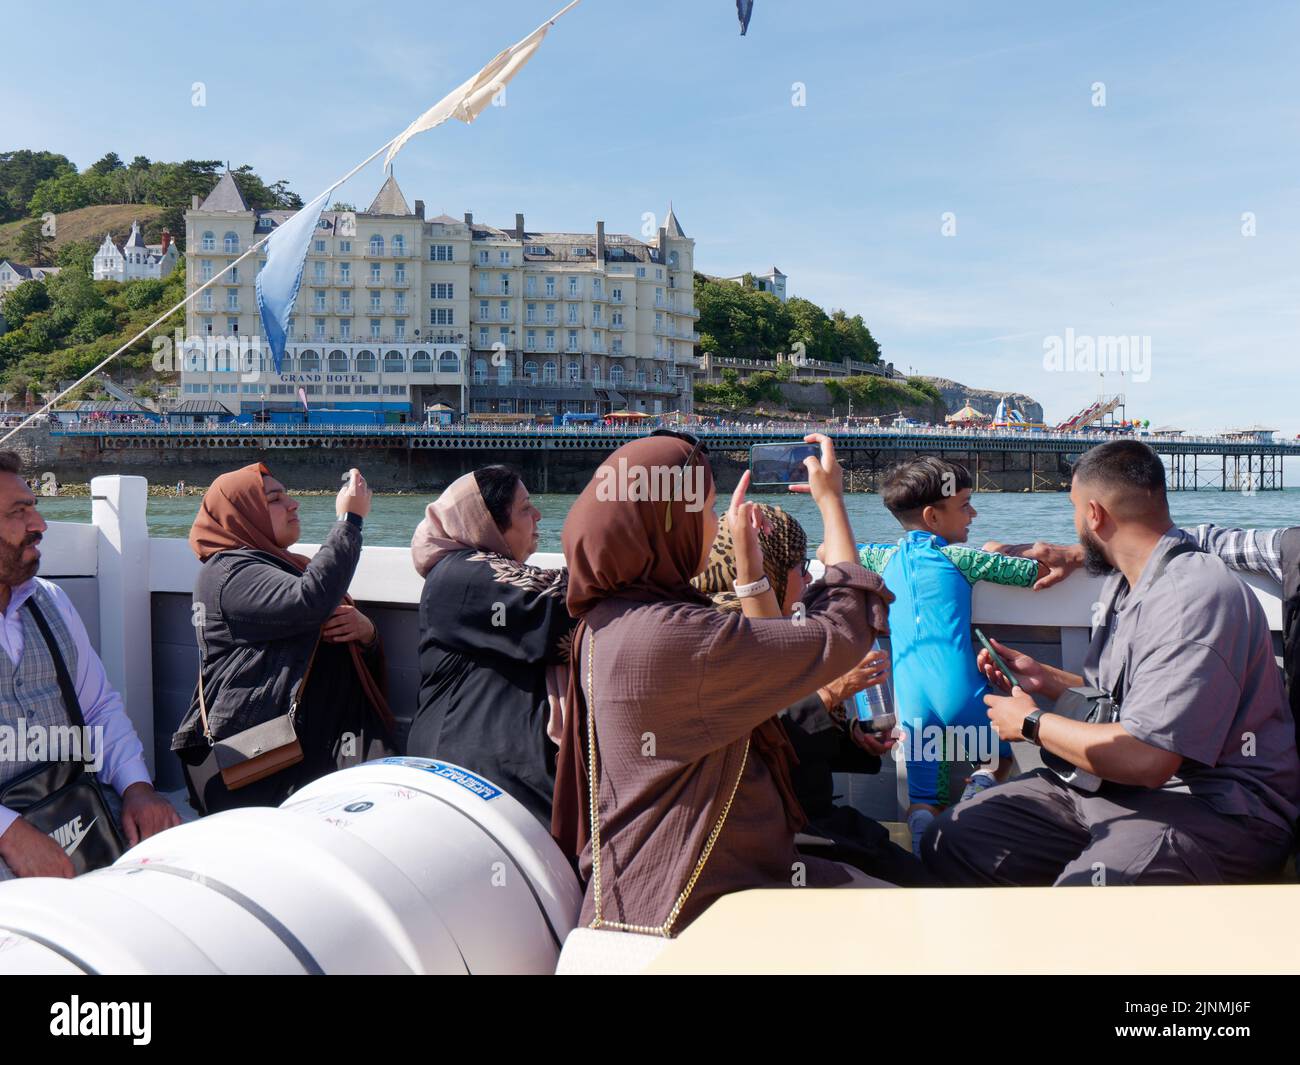 Llandudno, Clwyd, Wales, August 07 2022: People enjoying a boat trip and taking photos with the Grand Hotel and pier in the background. Stock Photo